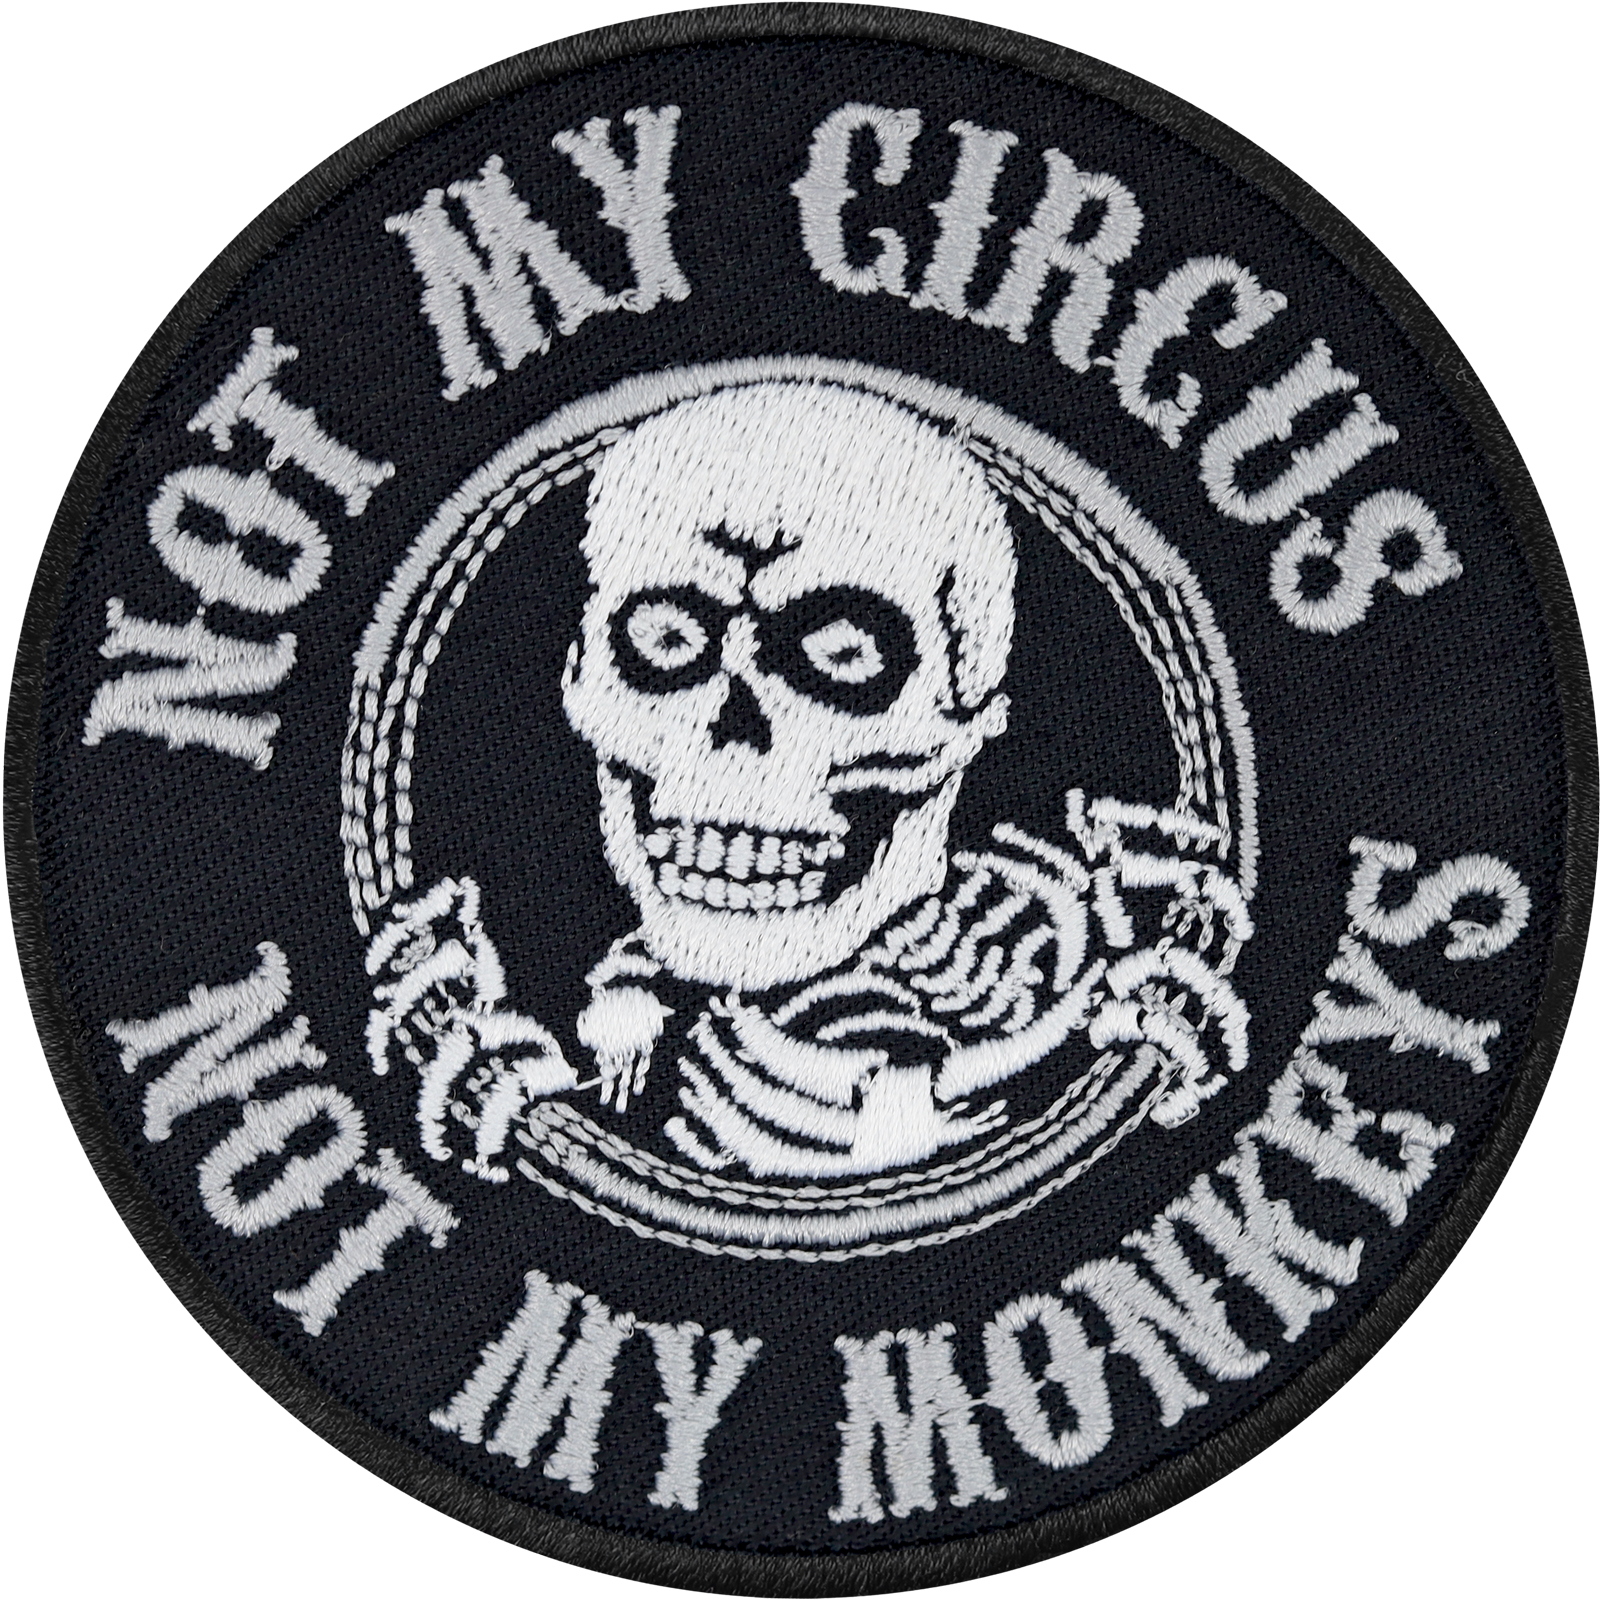 Not my circus, not my monkeys - Patch